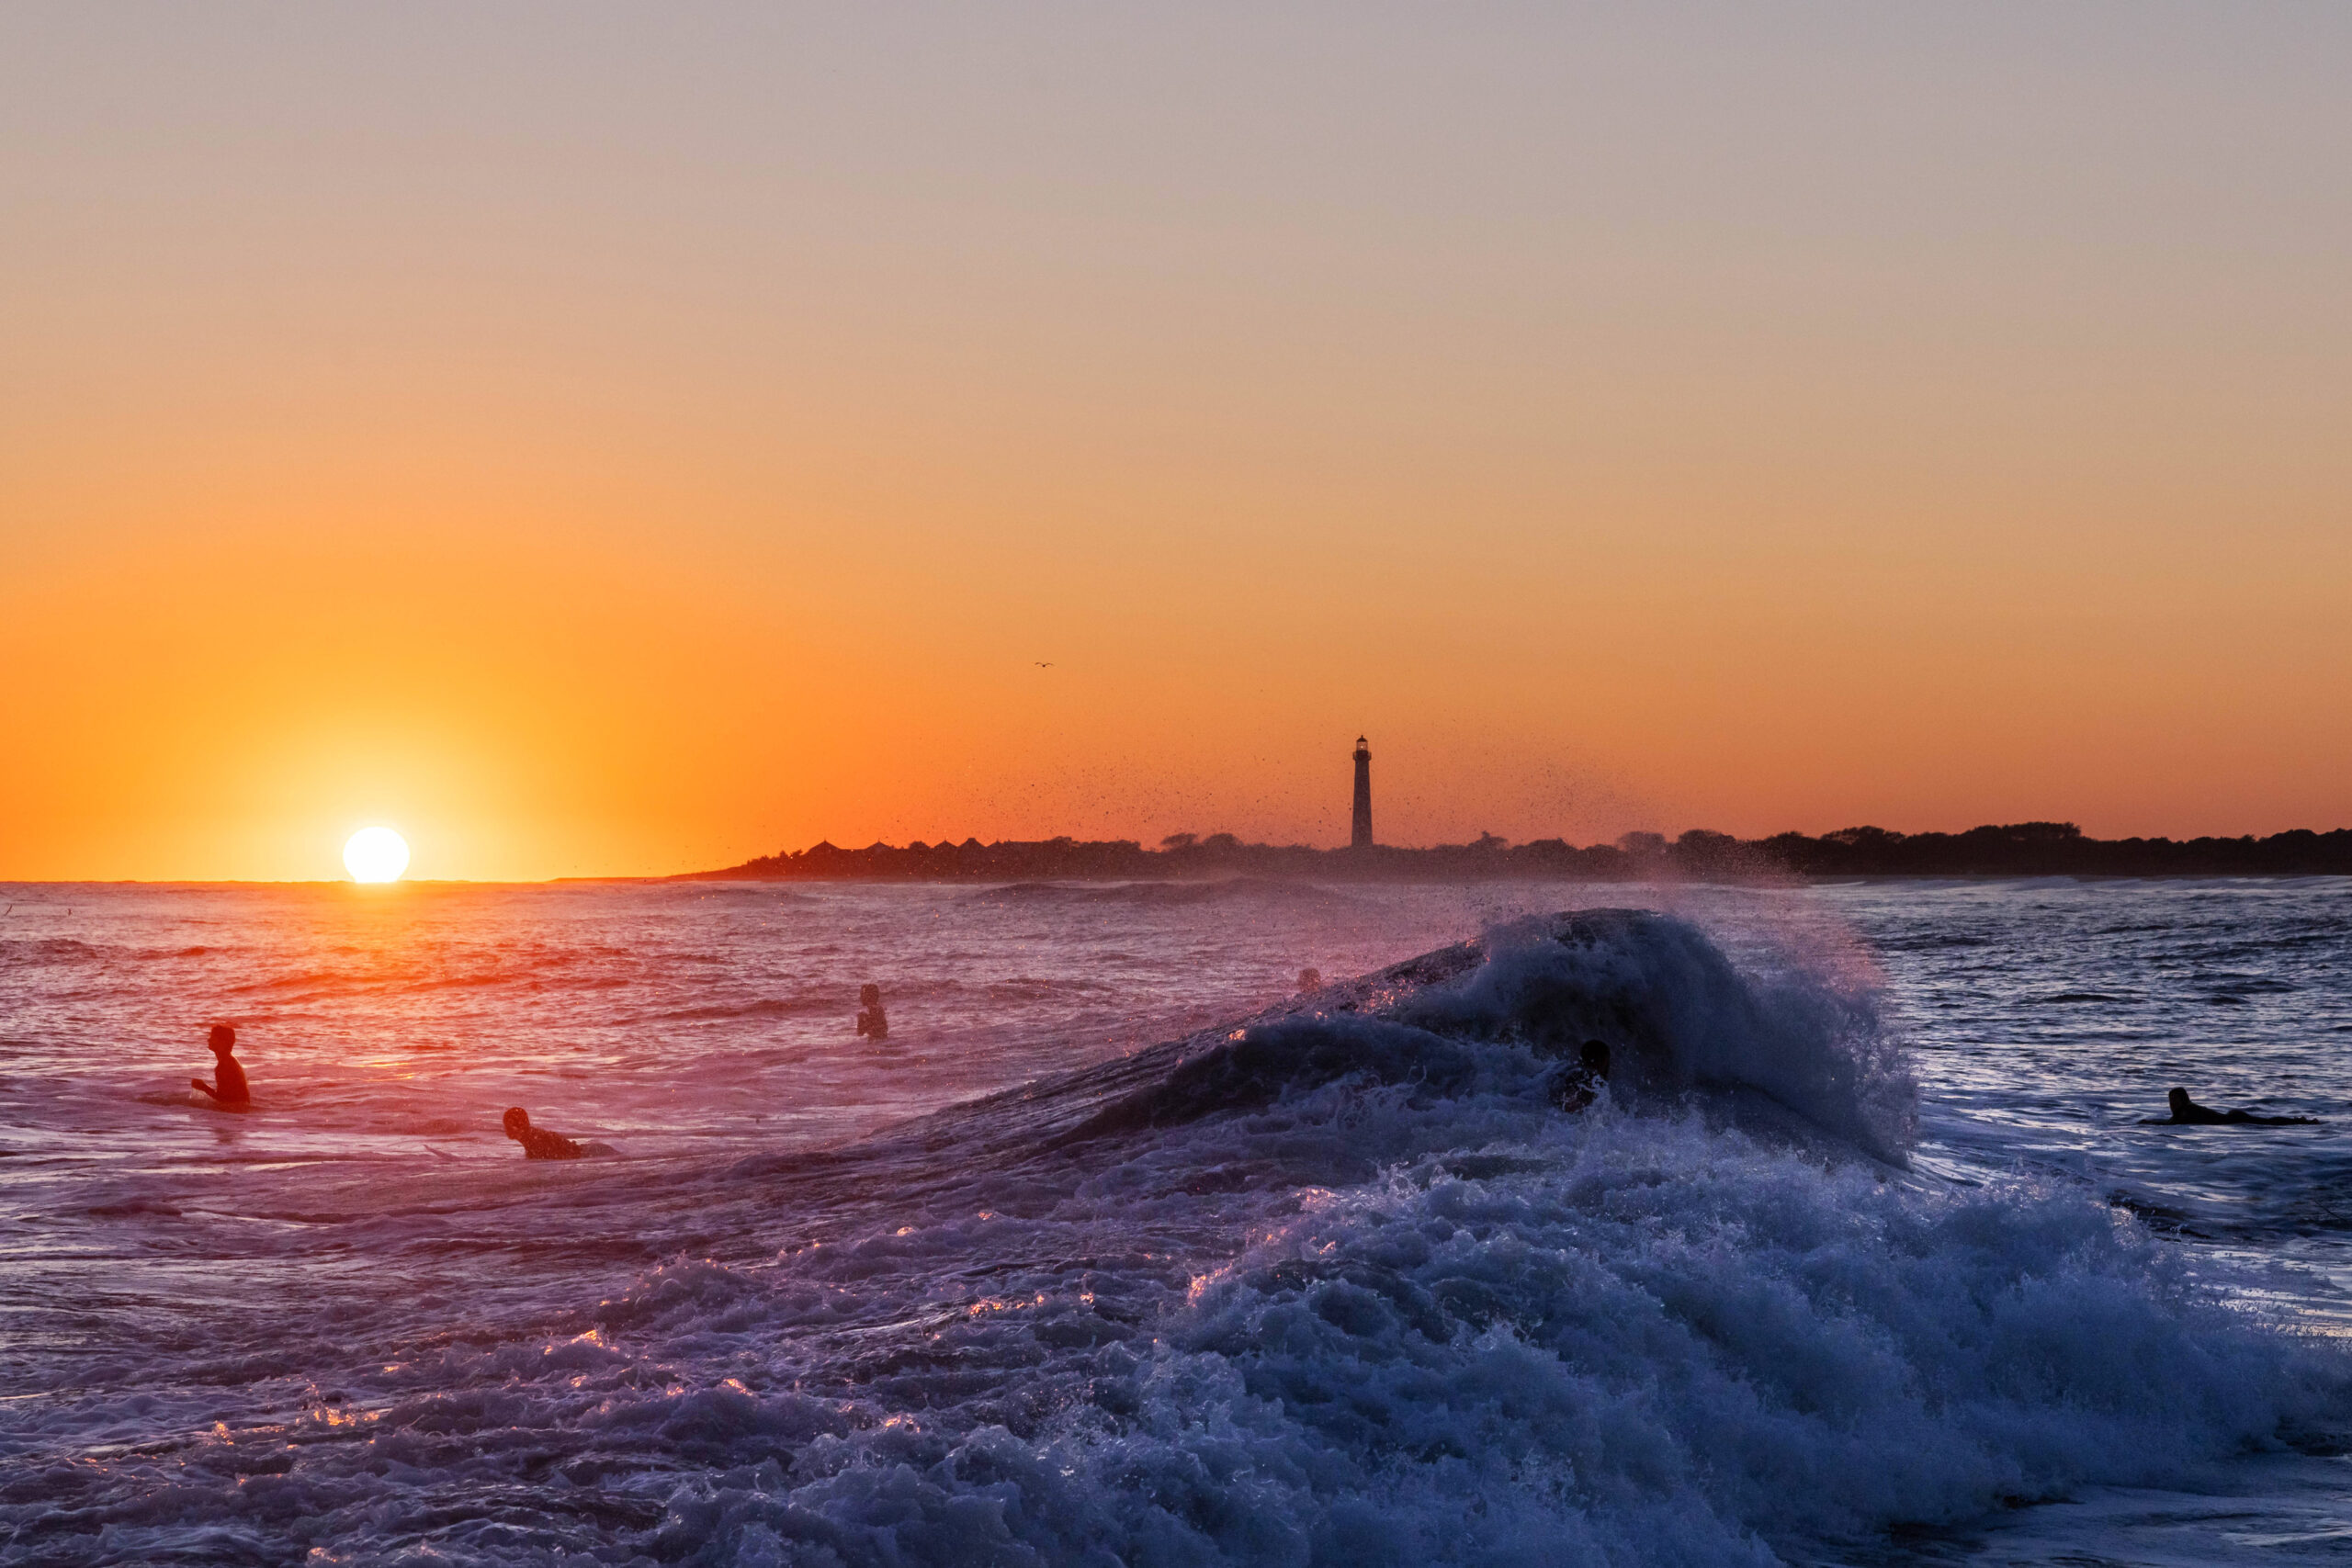 A big wave crashing with surfers in the ocean, and the Cape May Lighthouse in the distance at sunset